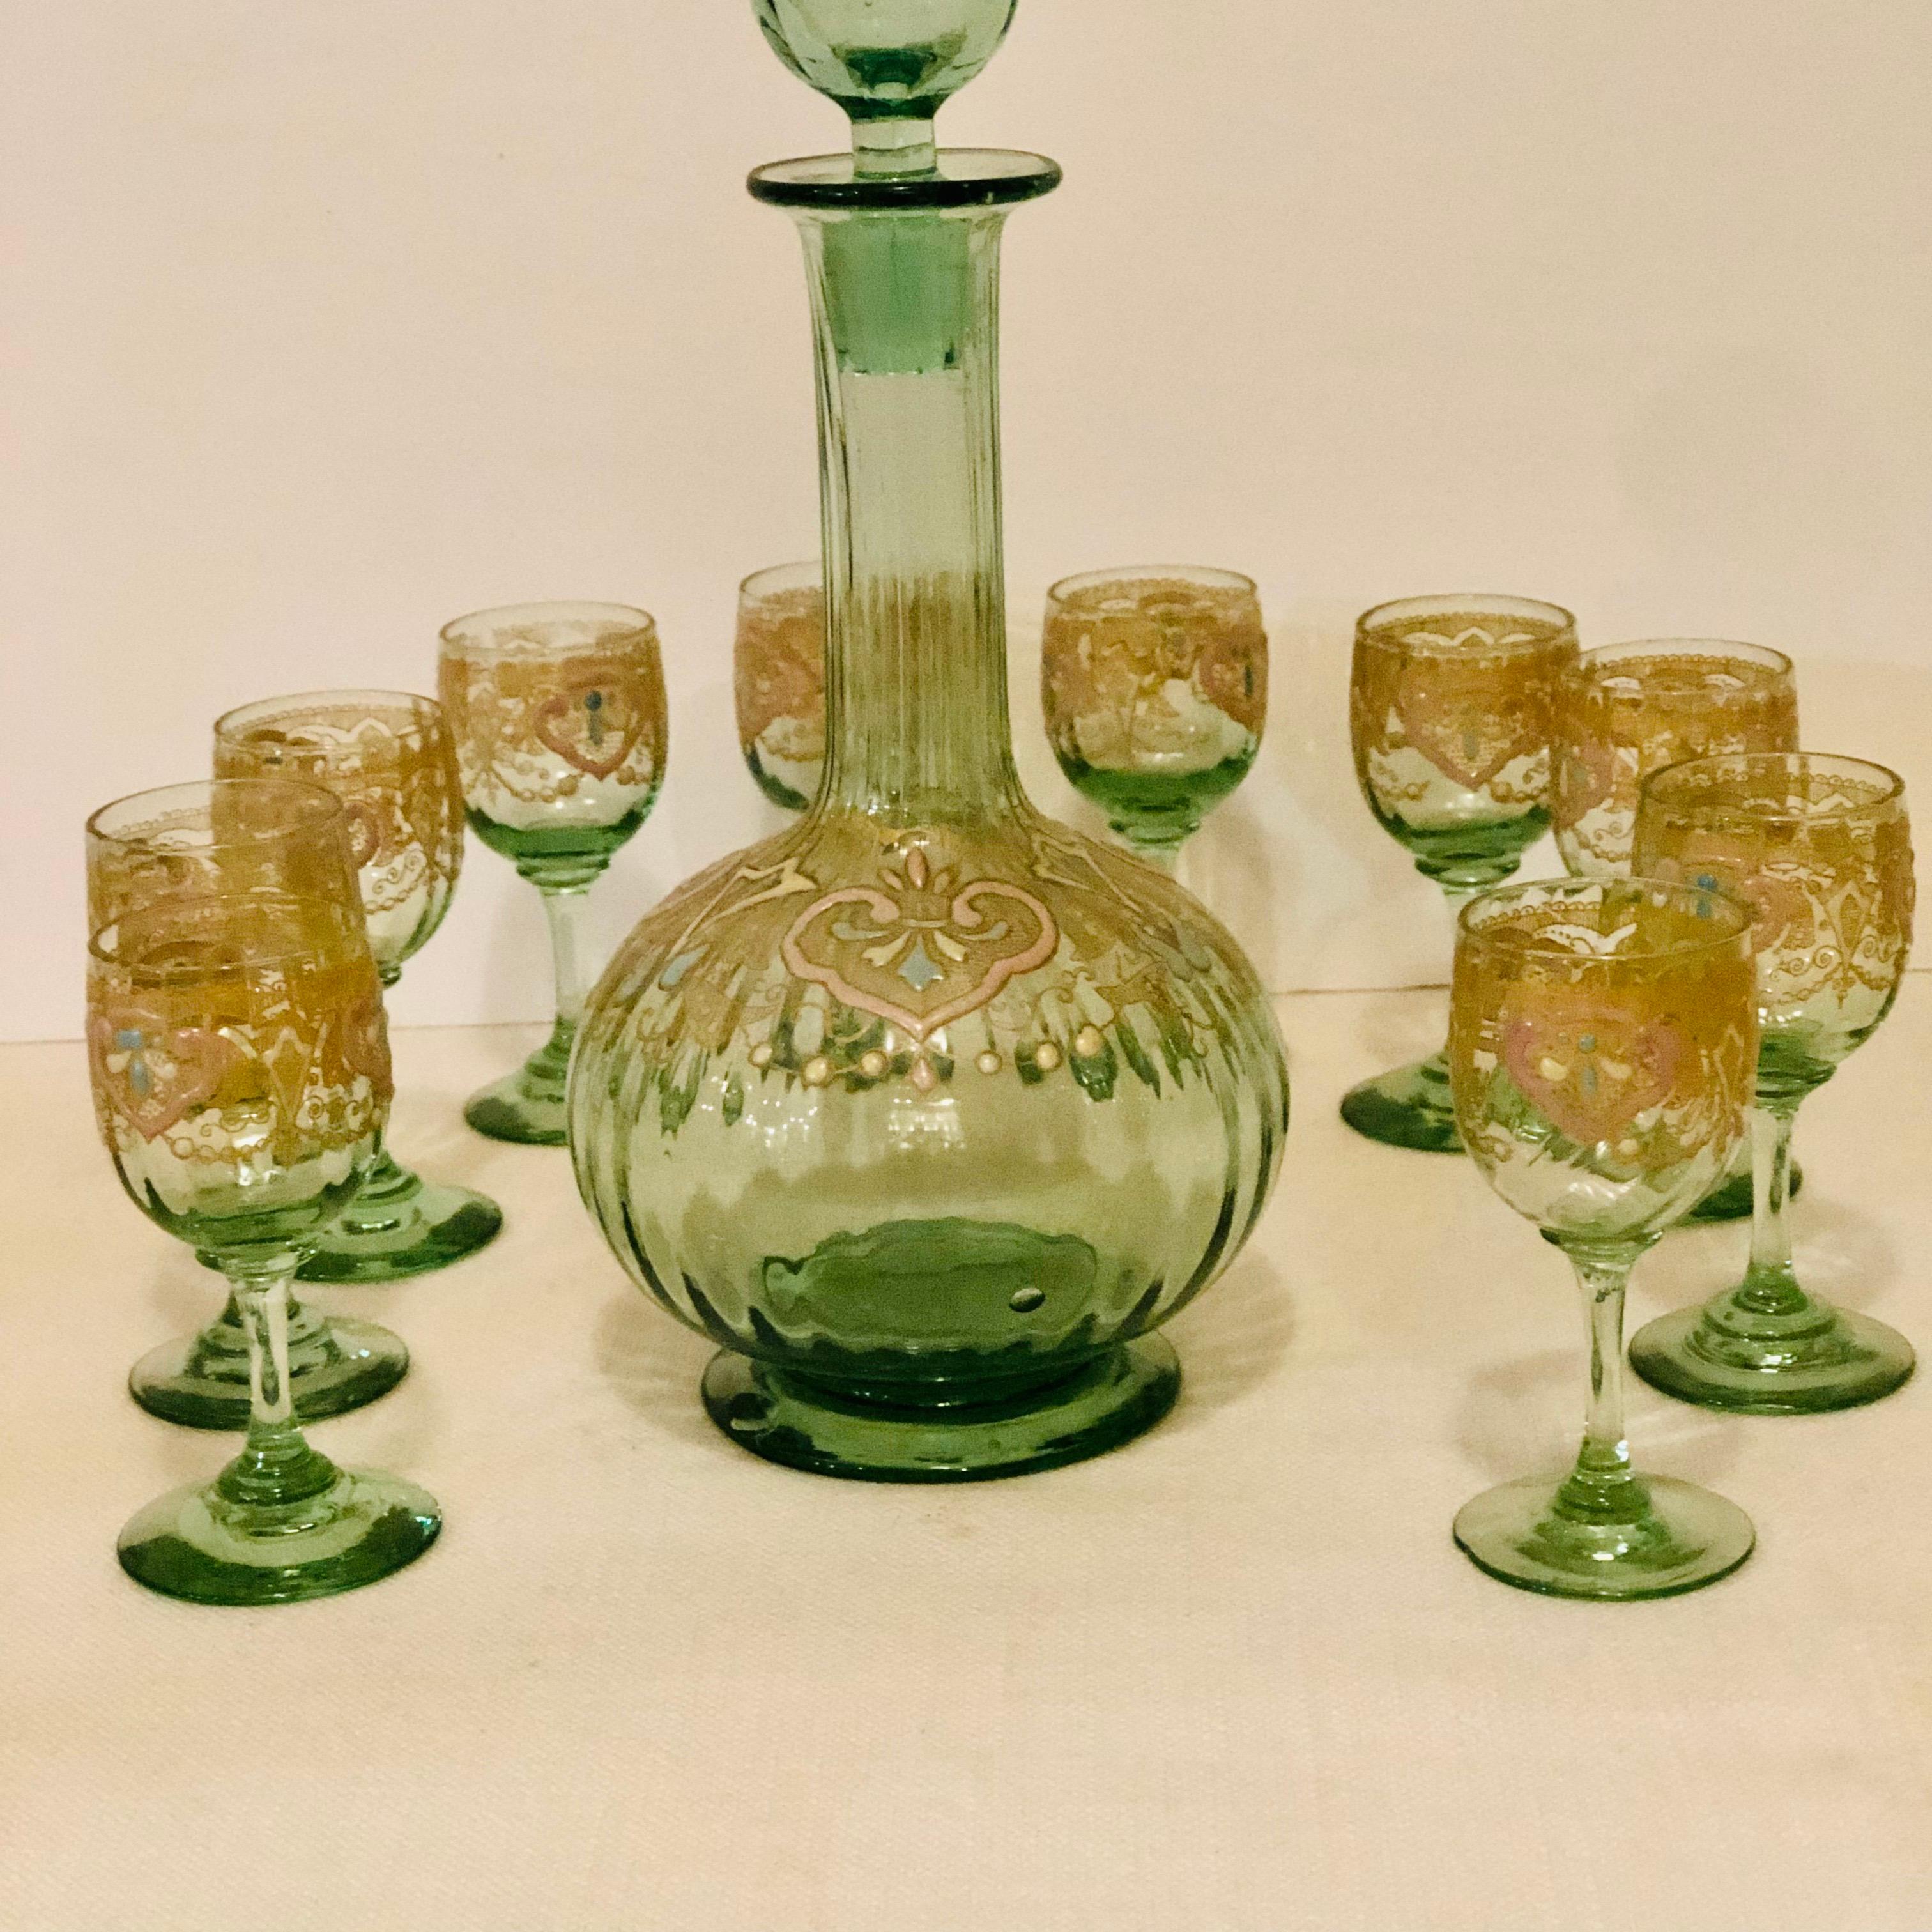 Venetian Decanter With Ten Venetian Cordial Glasses With Colorful Enamel Accents 4